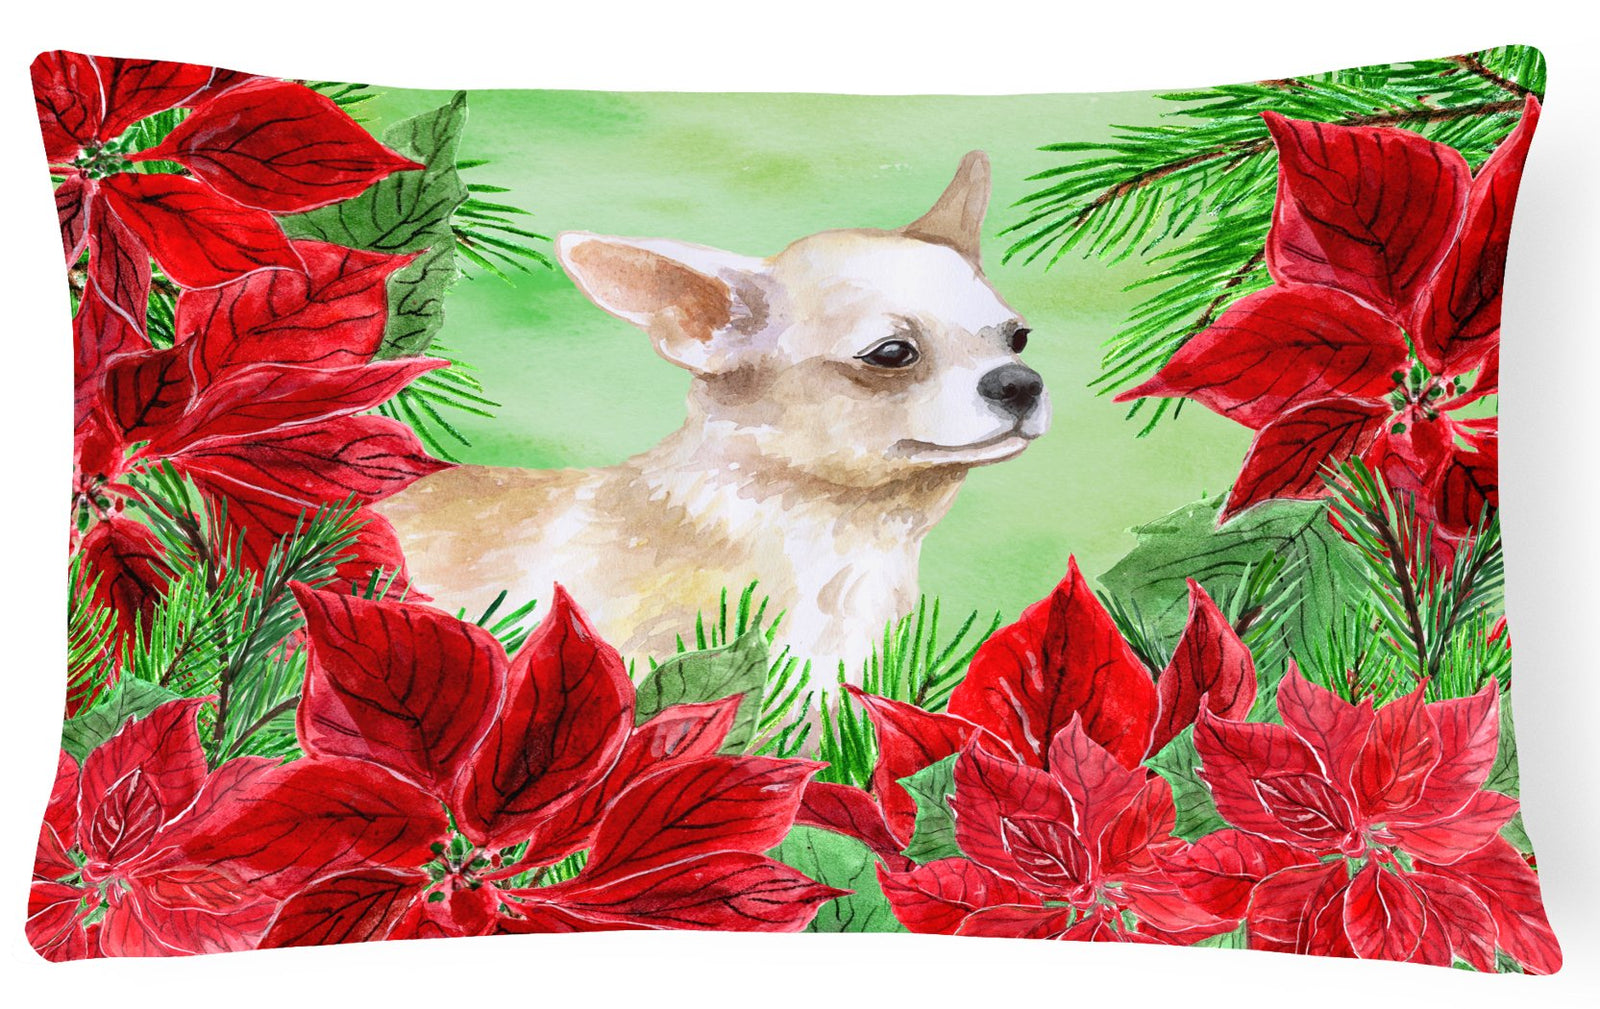 Chihuahua Leg up Poinsettas Canvas Fabric Decorative Pillow CK1345PW1216 by Caroline's Treasures